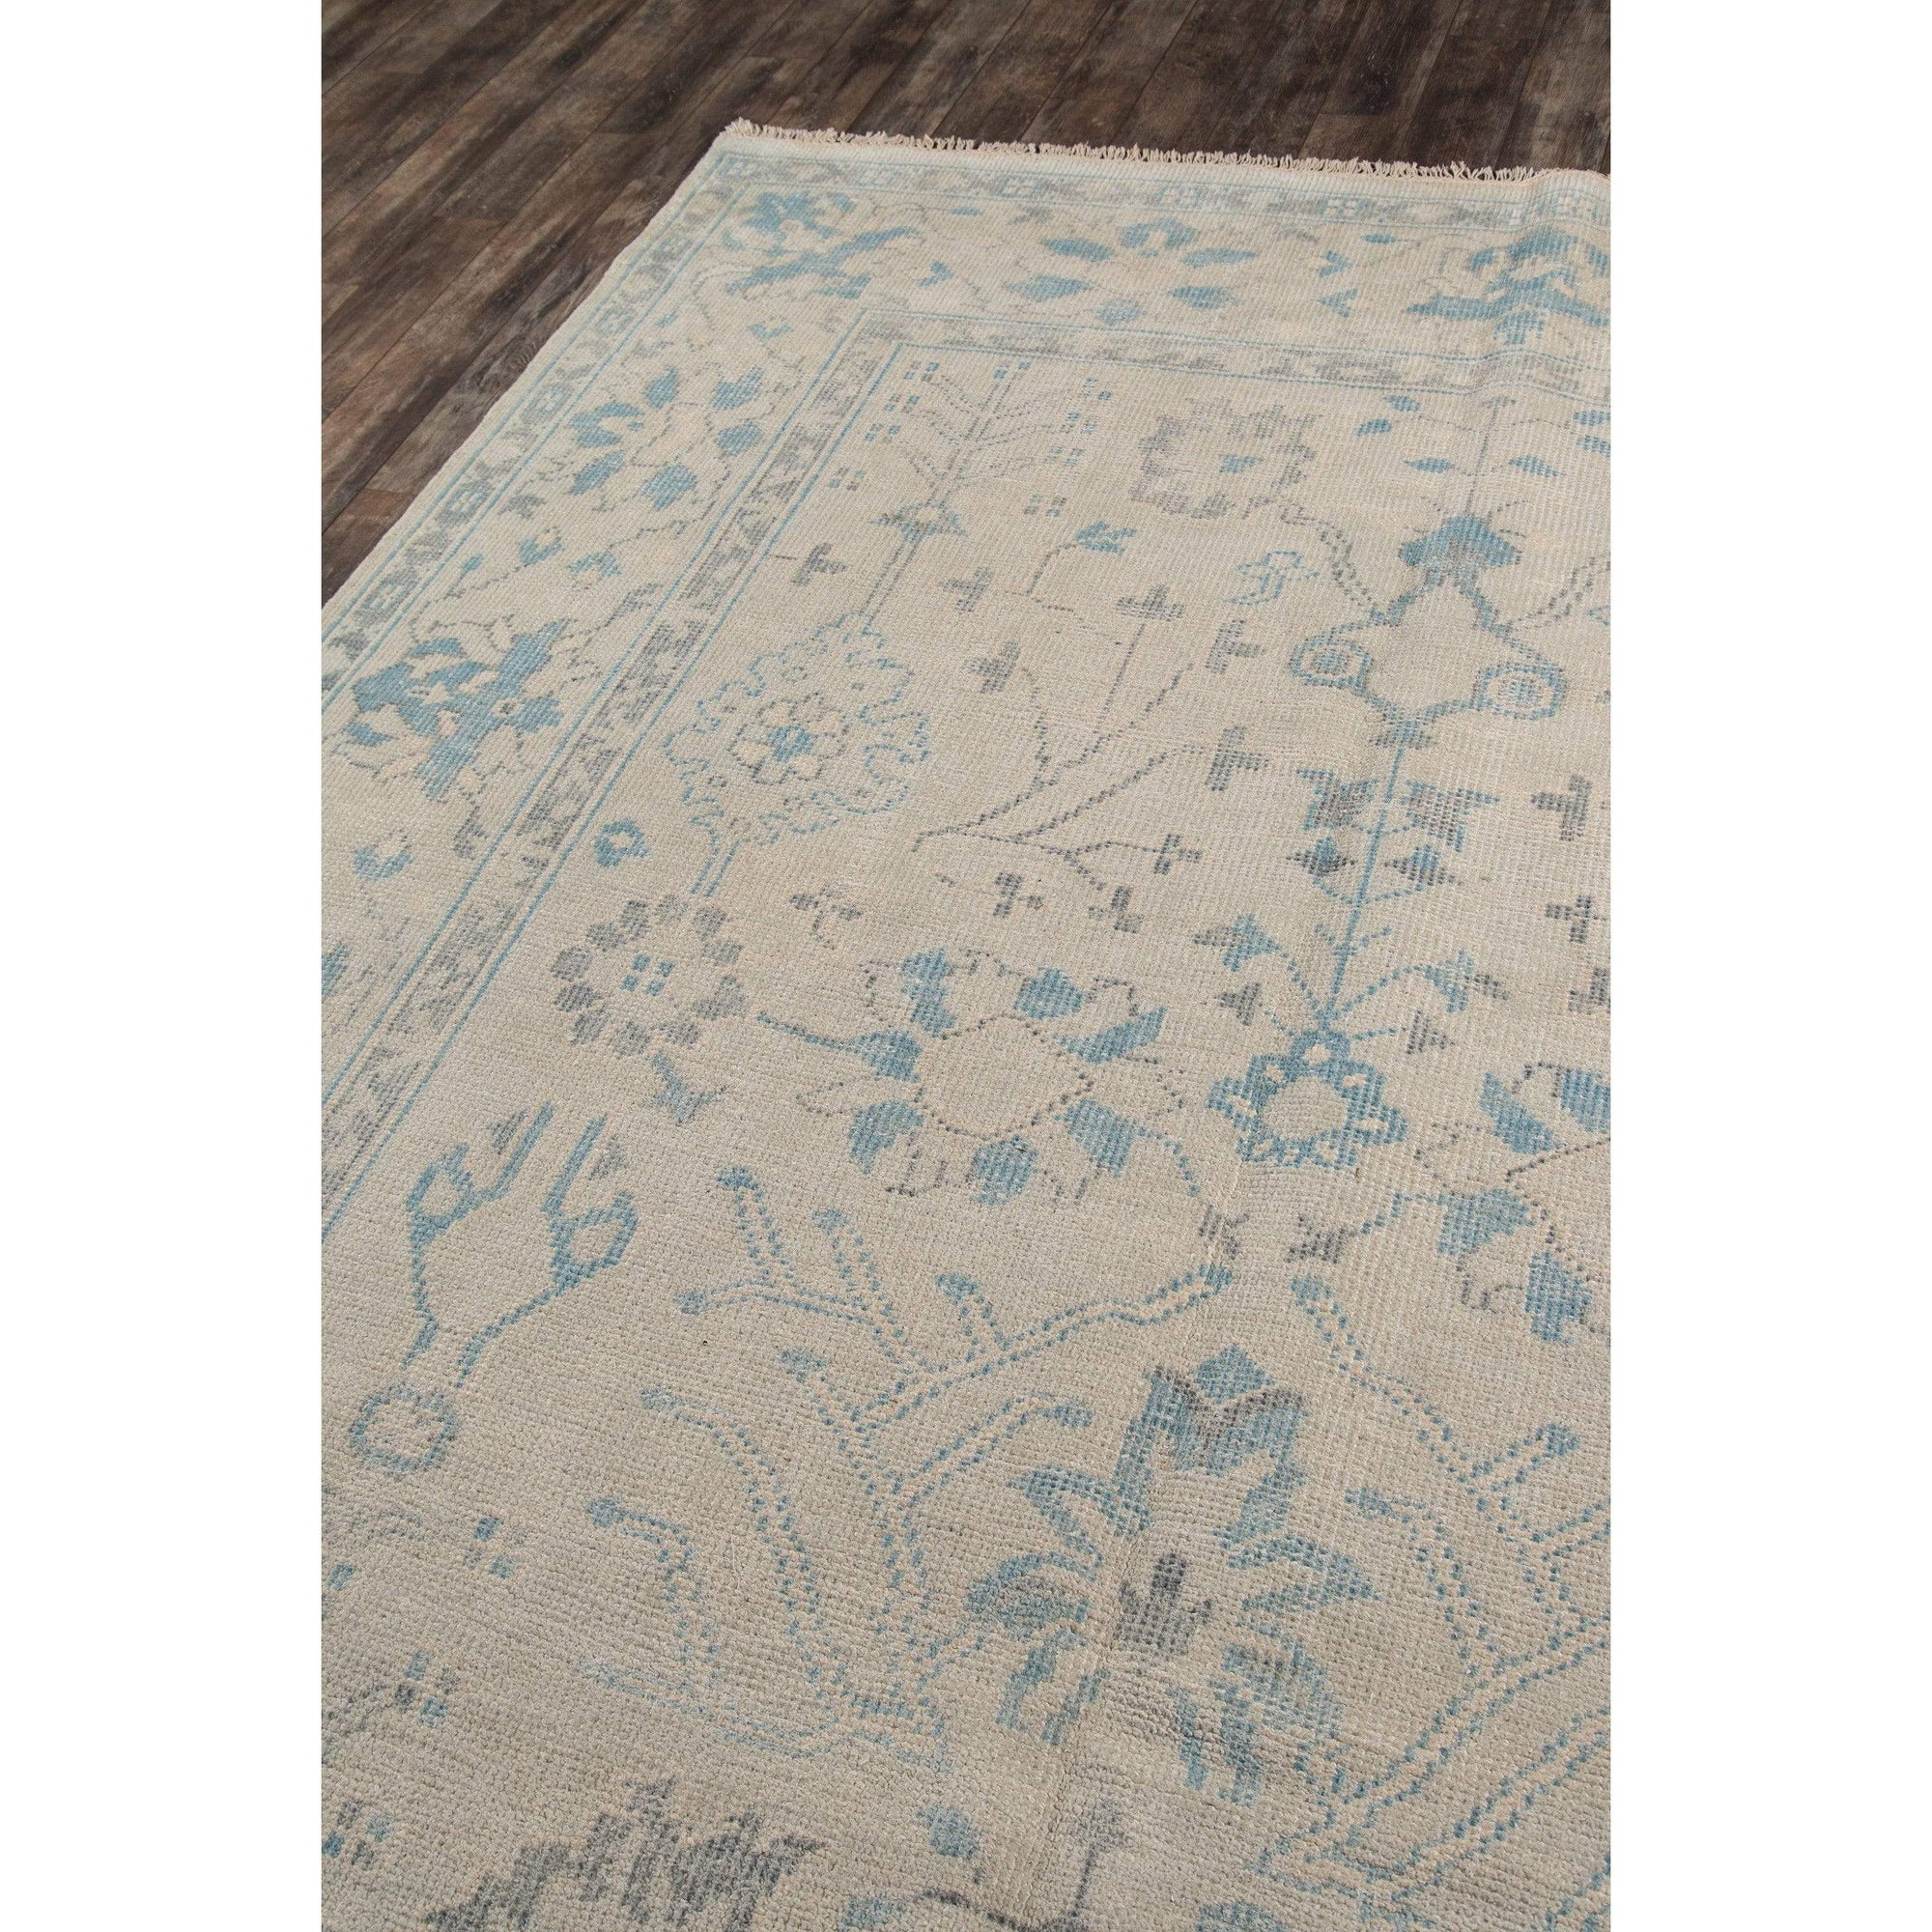 Rugs by Roo | Momeni Concord Lowell Area Rug-CONCDCRD-3IVY2030